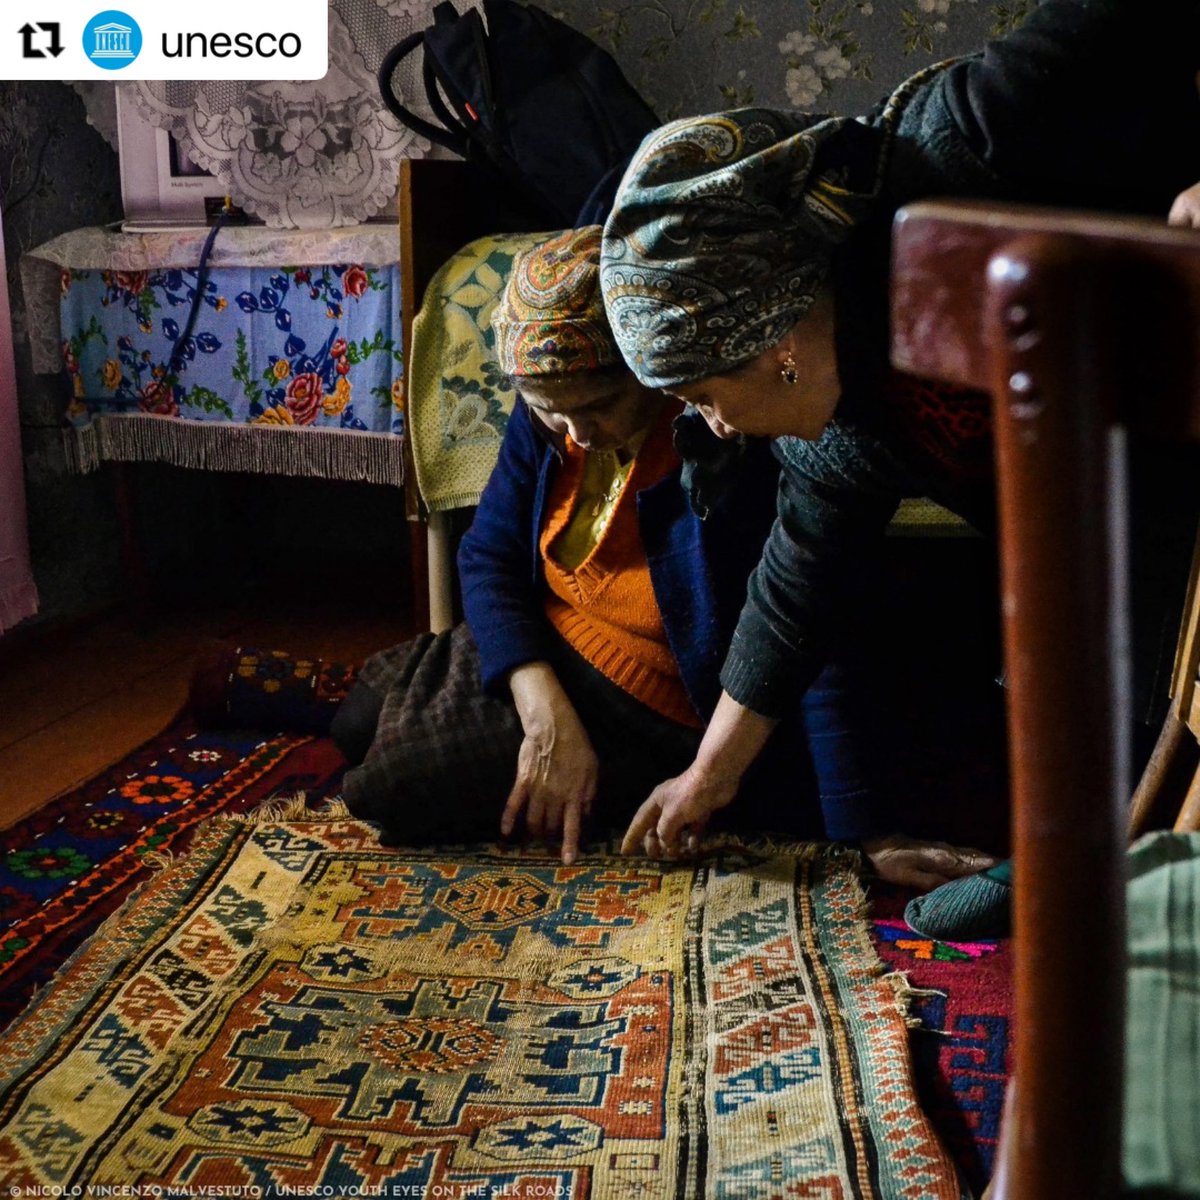 HURRY UP! There is one week left to apply for the @unesco #unescosilkroads photo contest! spread your photos to the world, Don't miss the chance!
DEADLINE - 31st of July
Learn more and apply -
unescosilkroadphotocontest.org
GOOD LUCK!